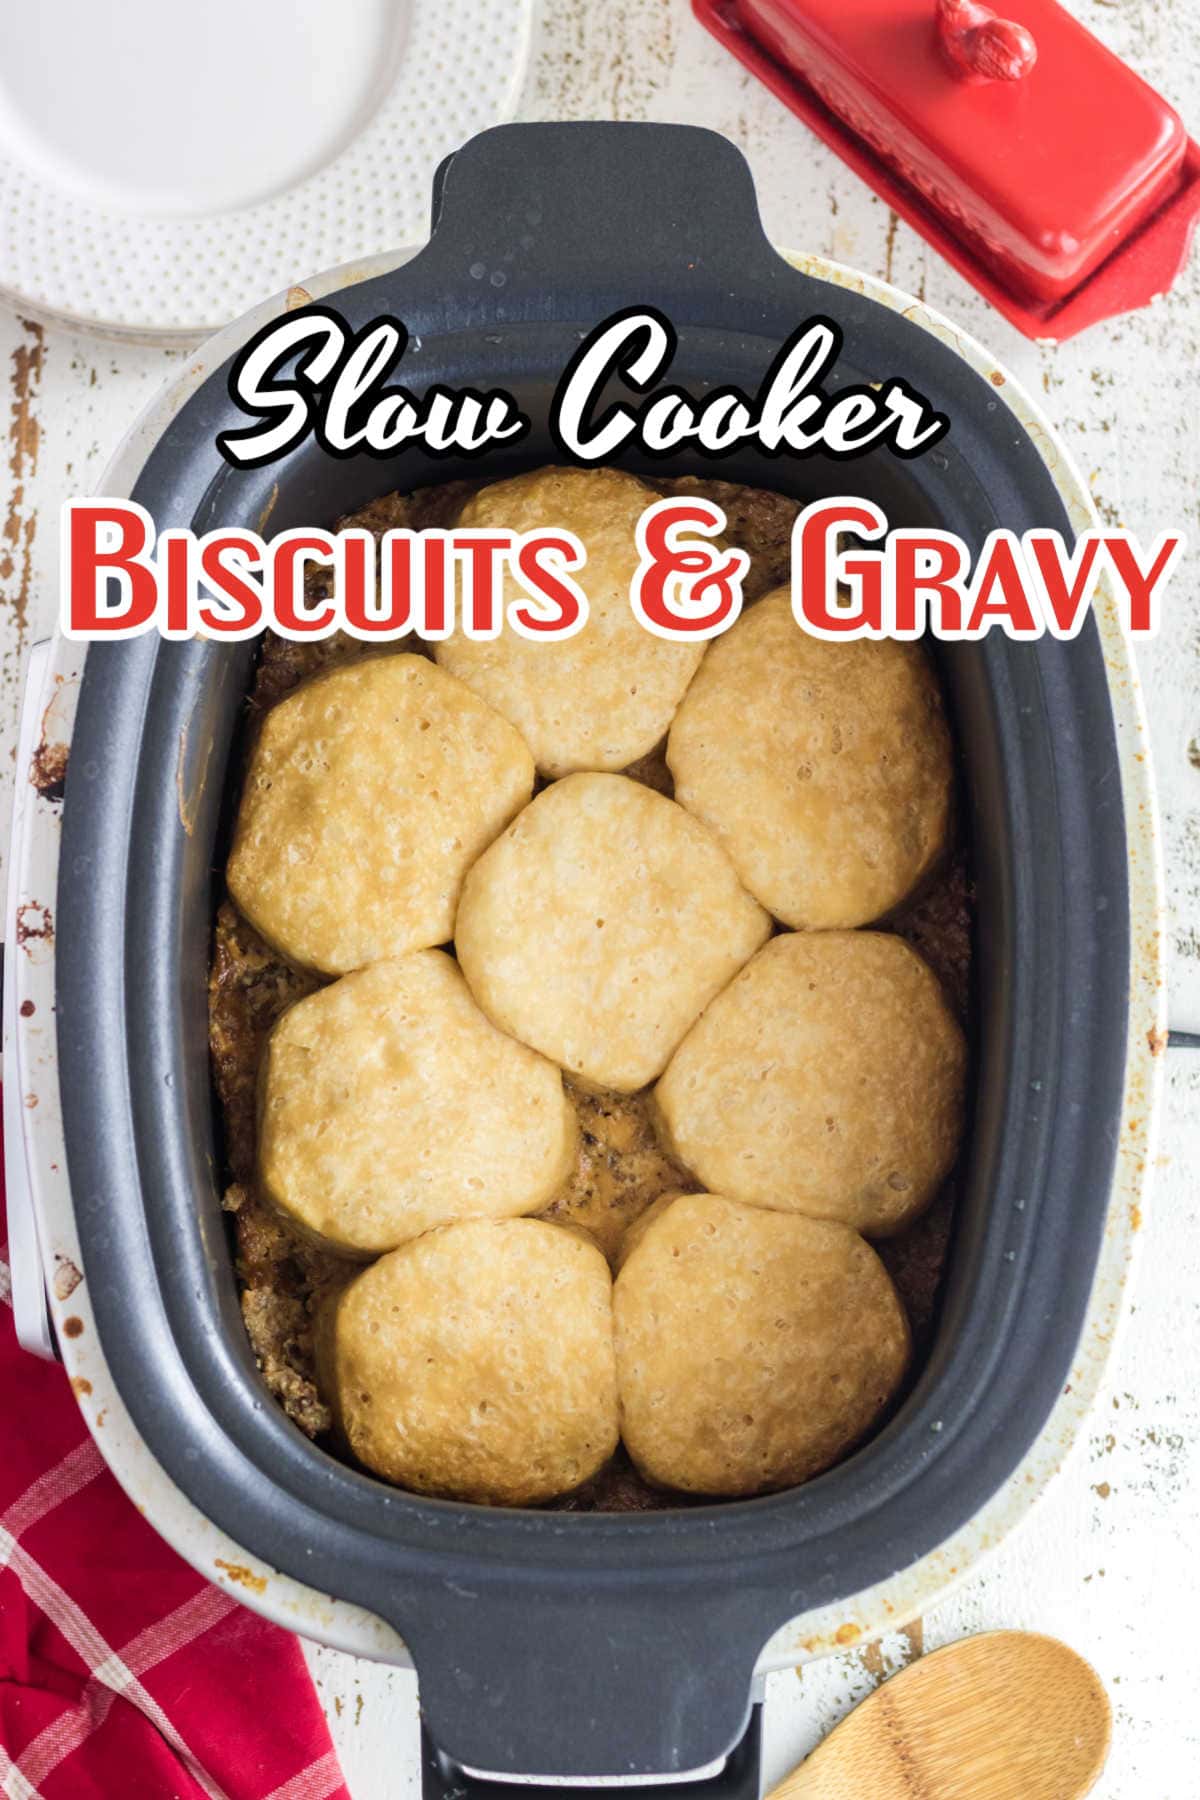 Overhead view of biscuits in the slow cooker with title text.